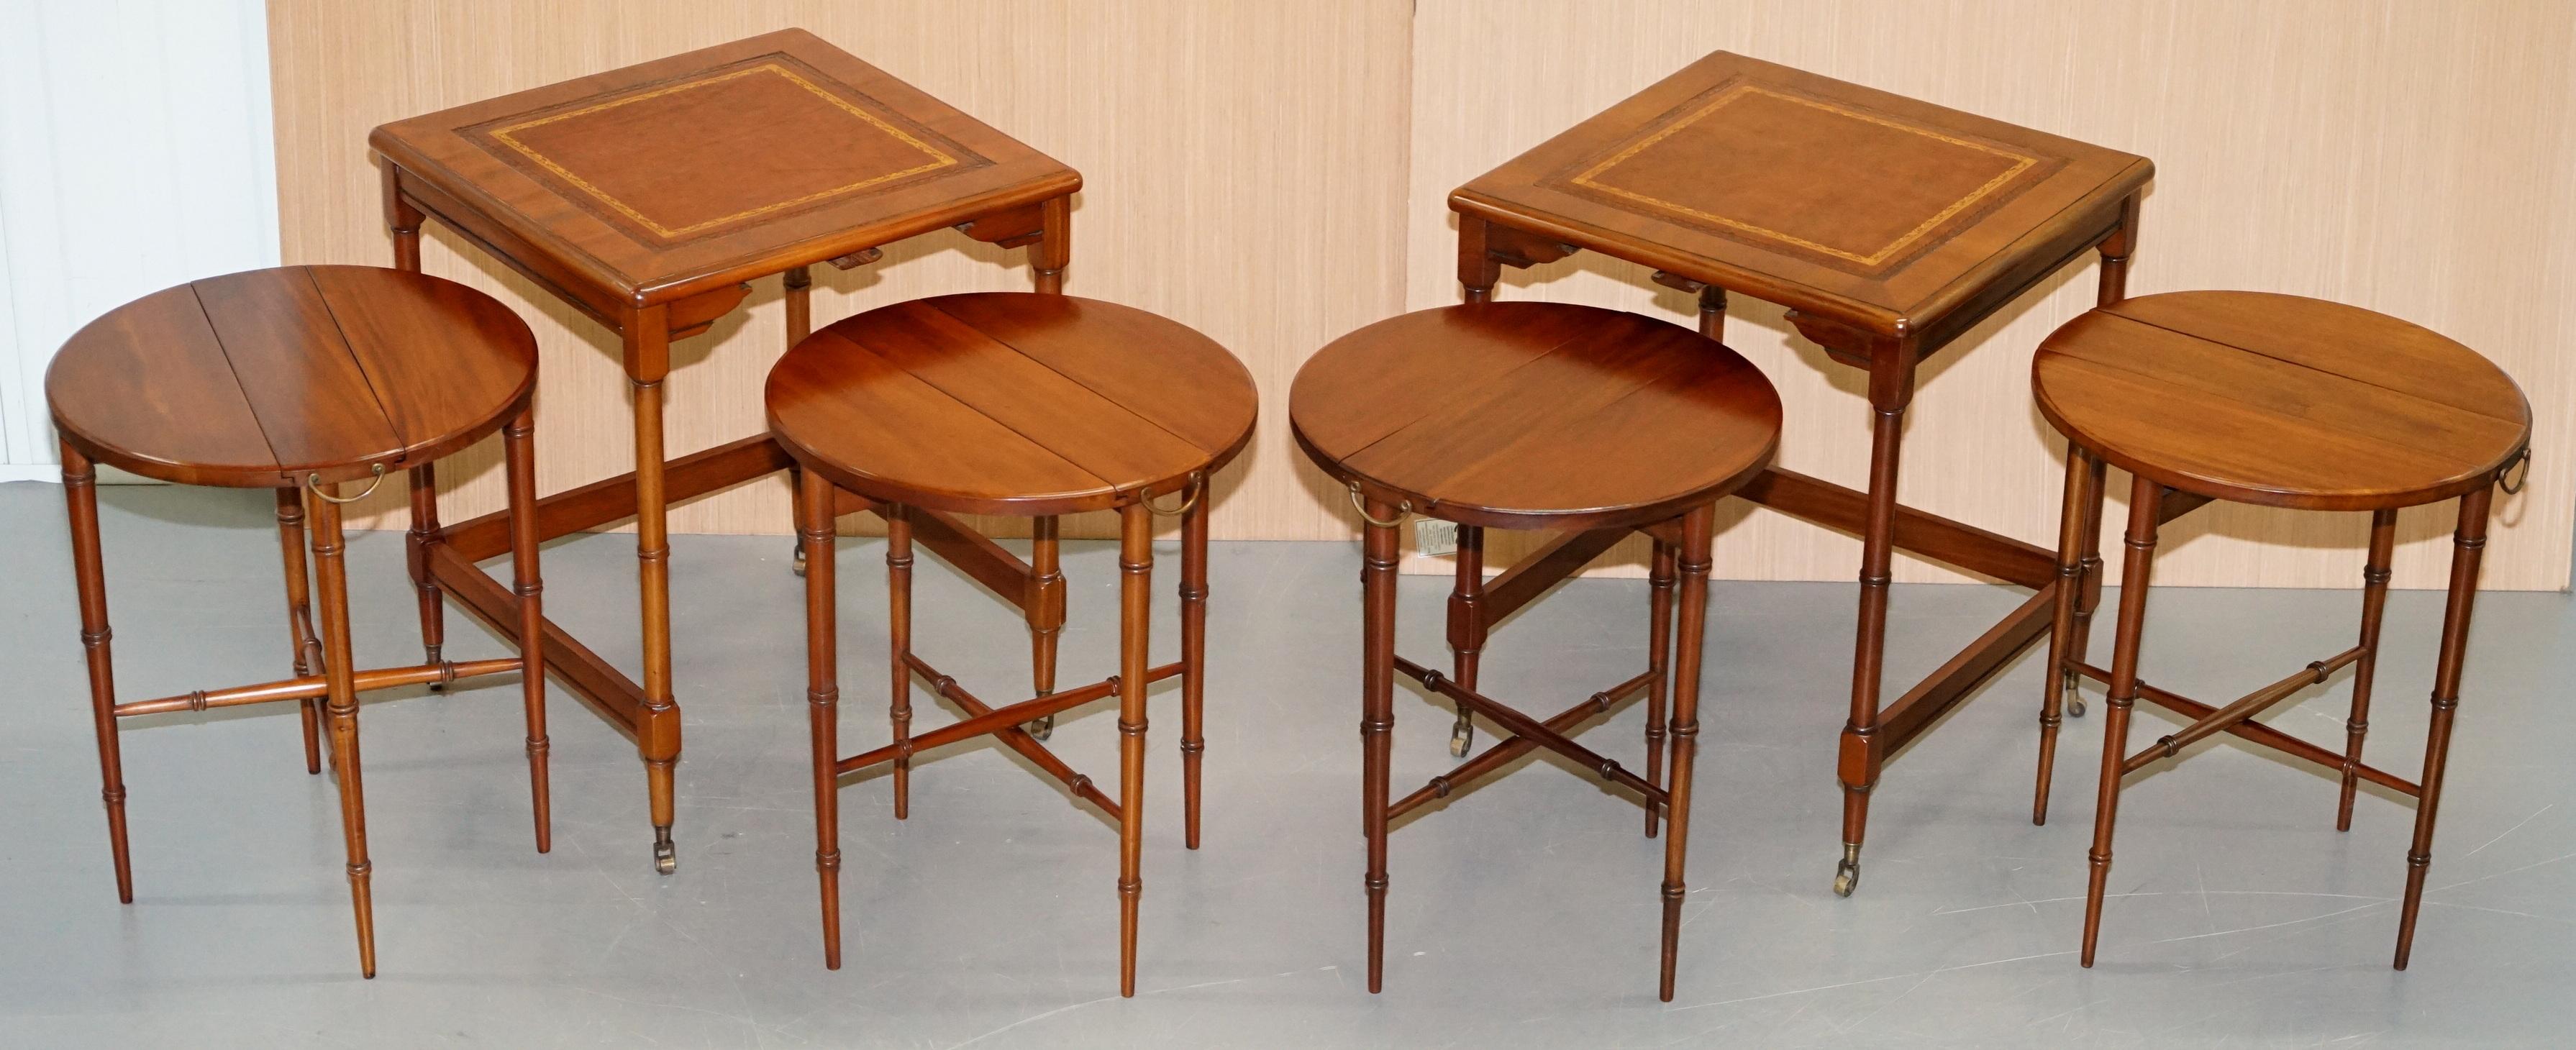 Rare Pair of Military Campaign Side Tables with Two Folded Round Tables Nested 6